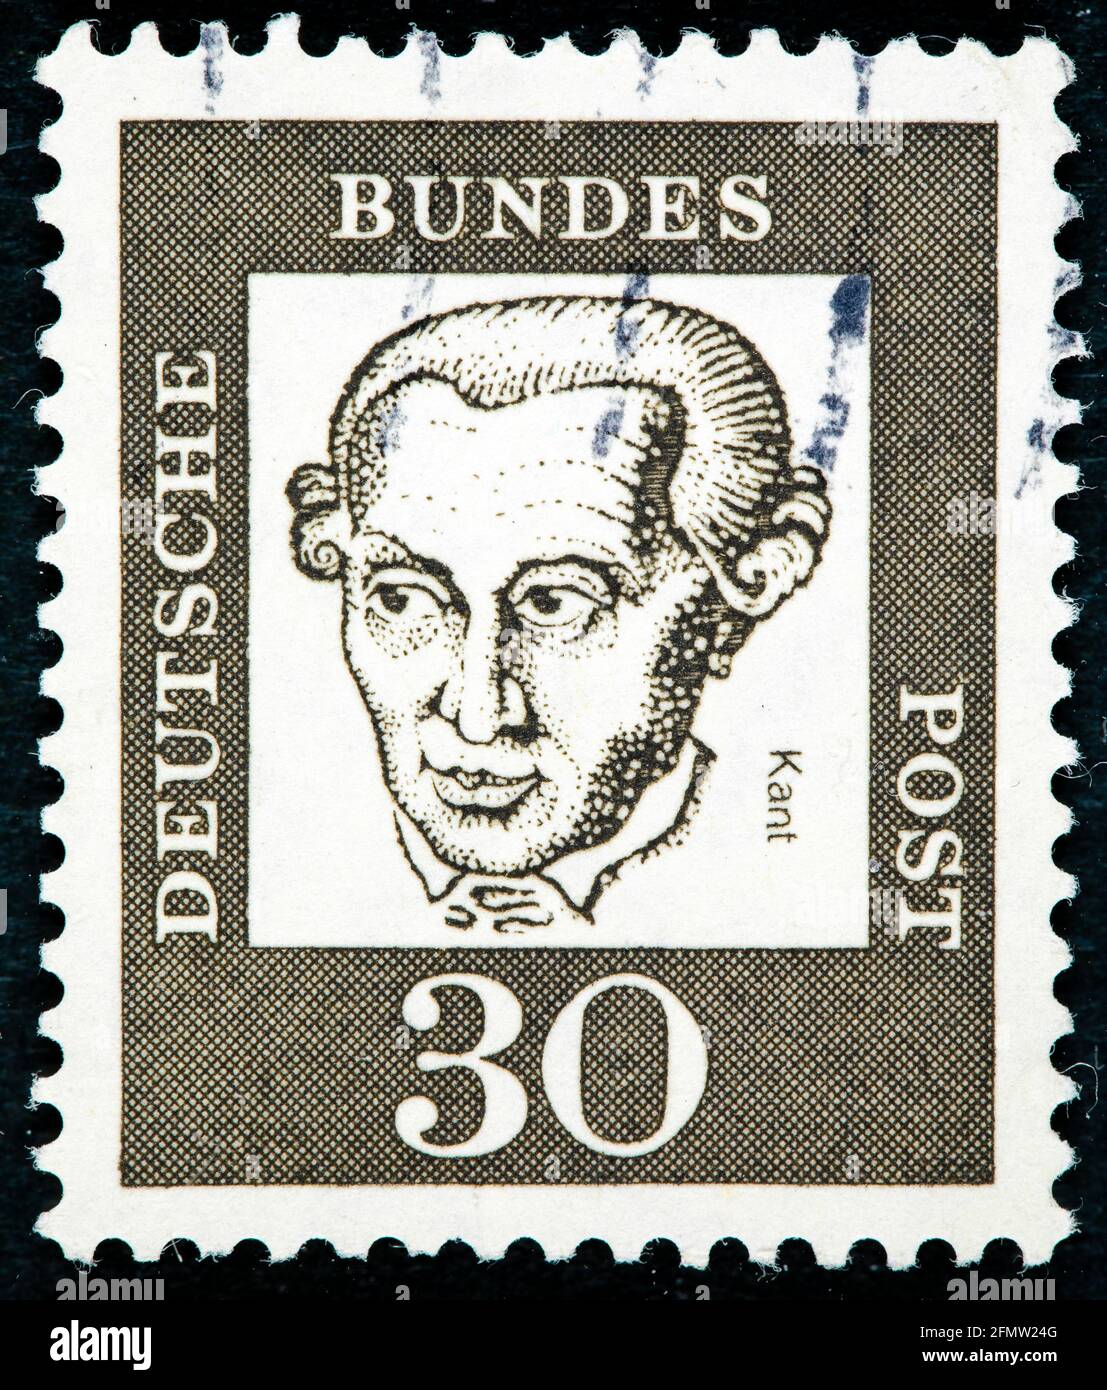 GERMANY - CIRCA 1961: a postage stamp from Germany, showing a portrait of the important German philosopher Immanuel Kant Stock Photo